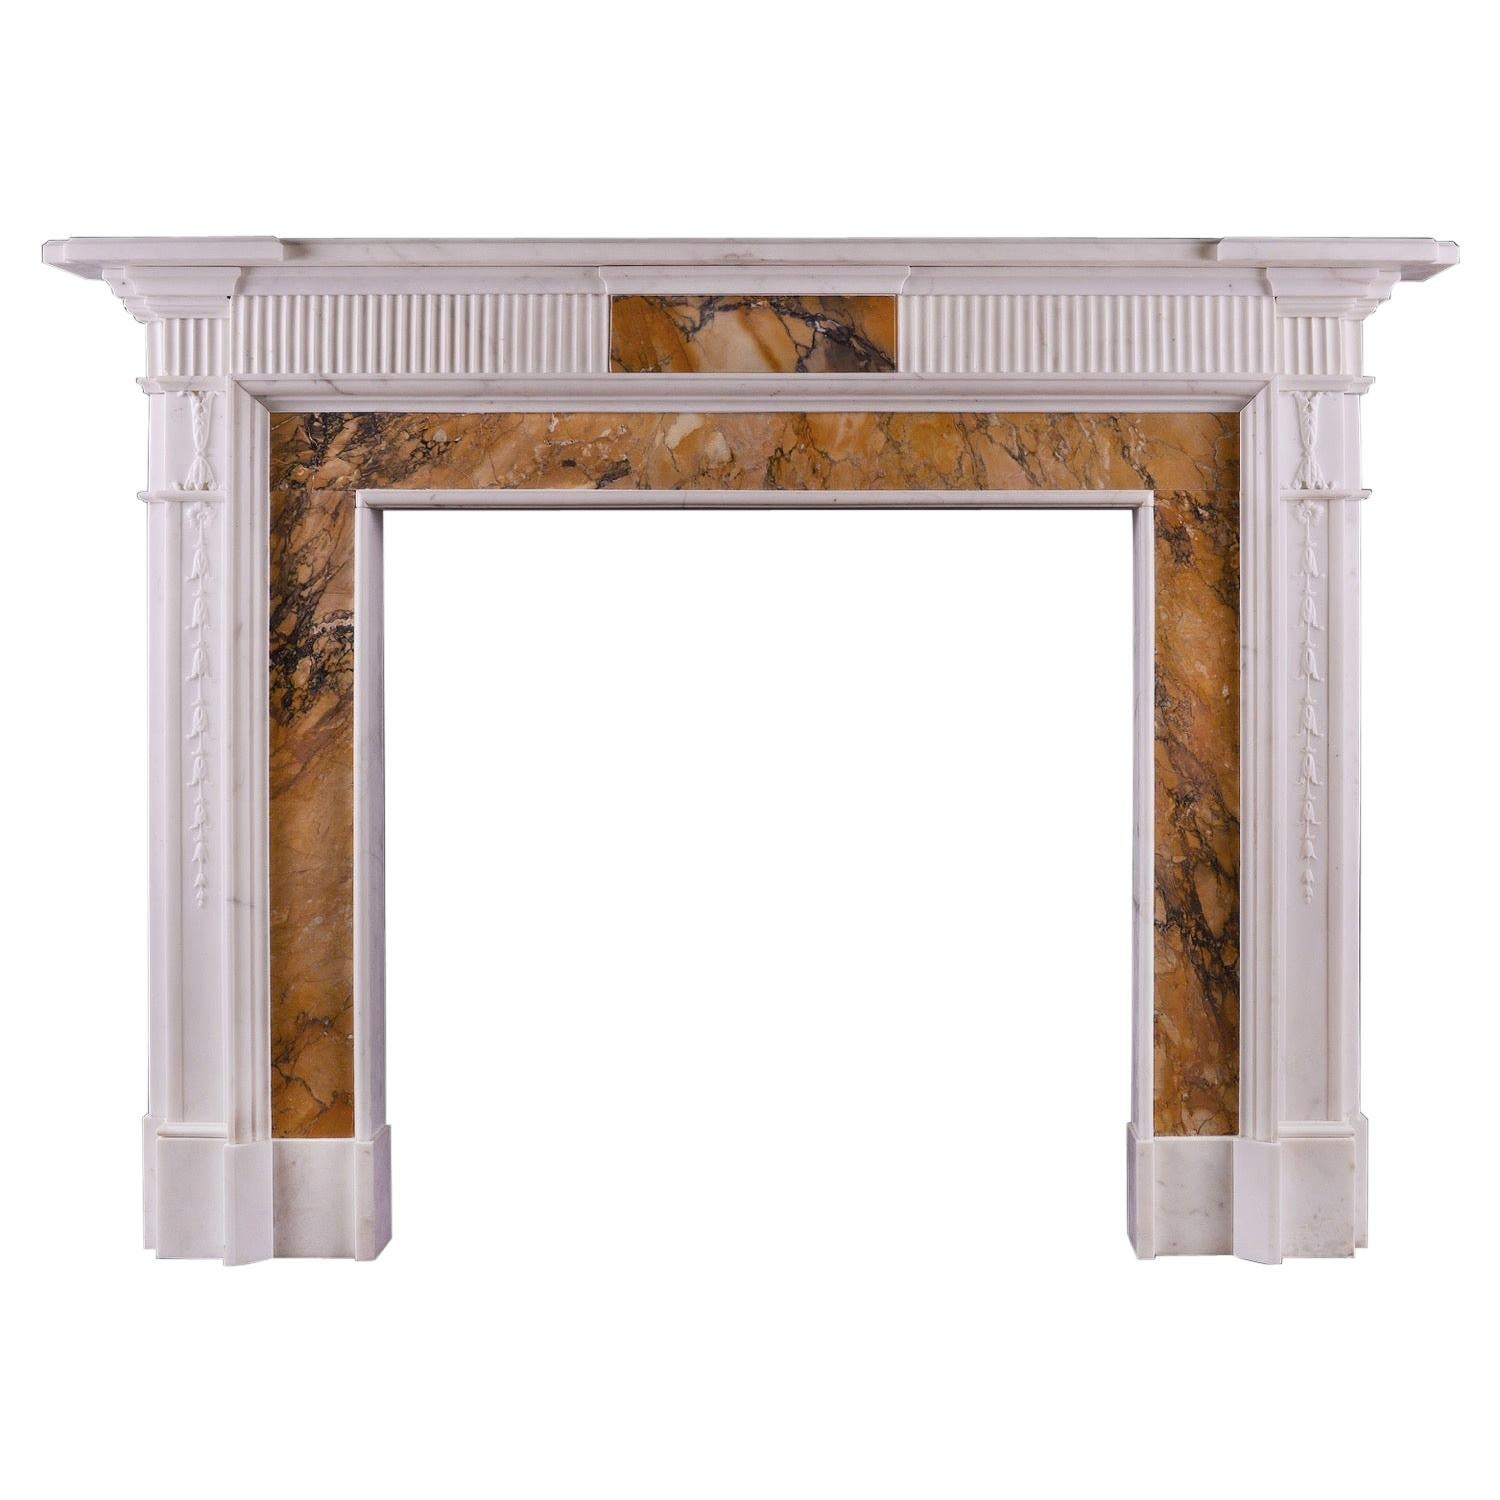 English Statuary & Siena Marble Fireplace For Sale